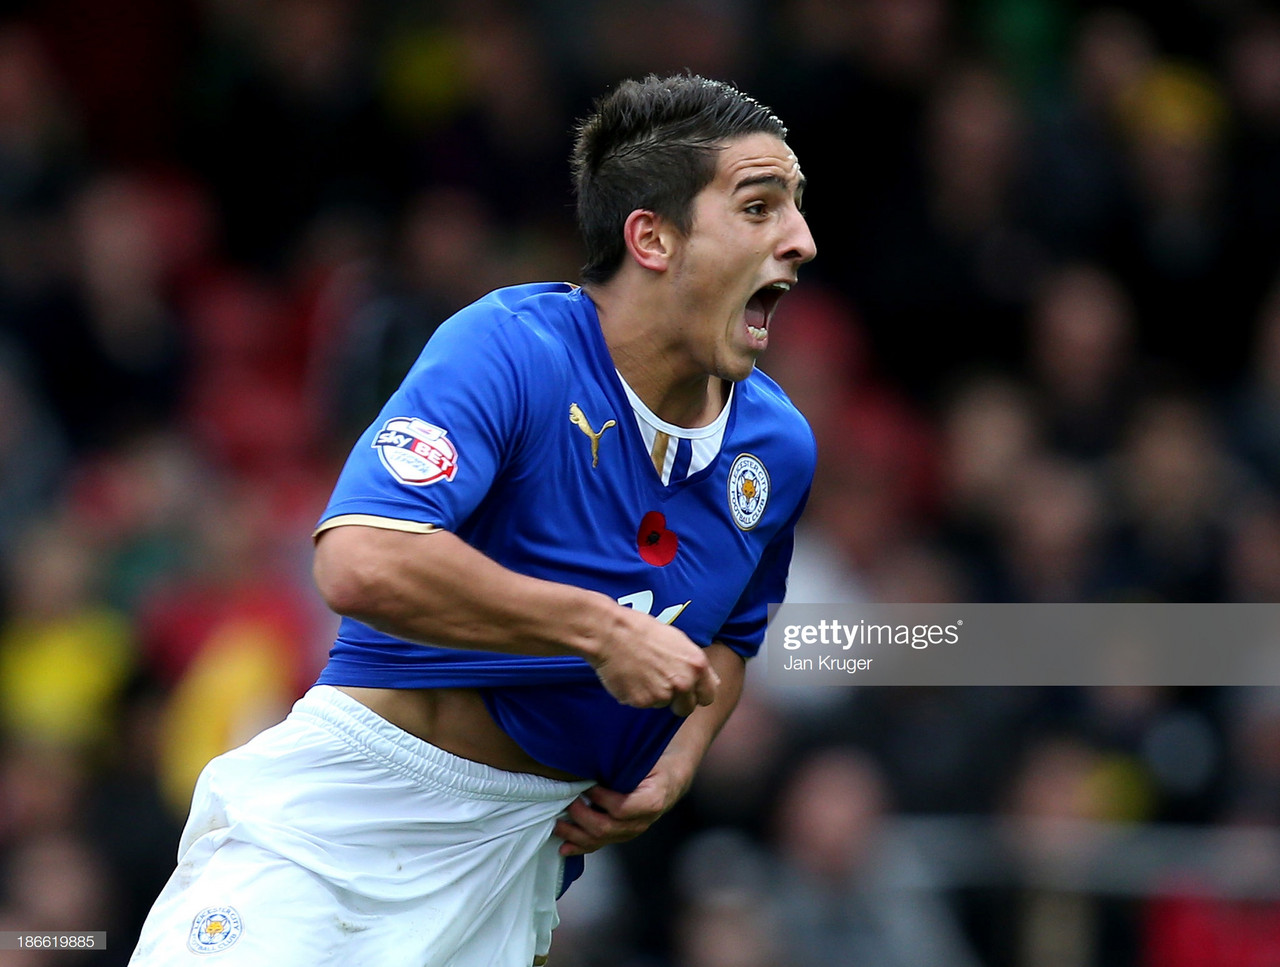 Memorable Match: Watford 0-3 Leicester City - Revenge for Knockaert as Foxes defeat Watford